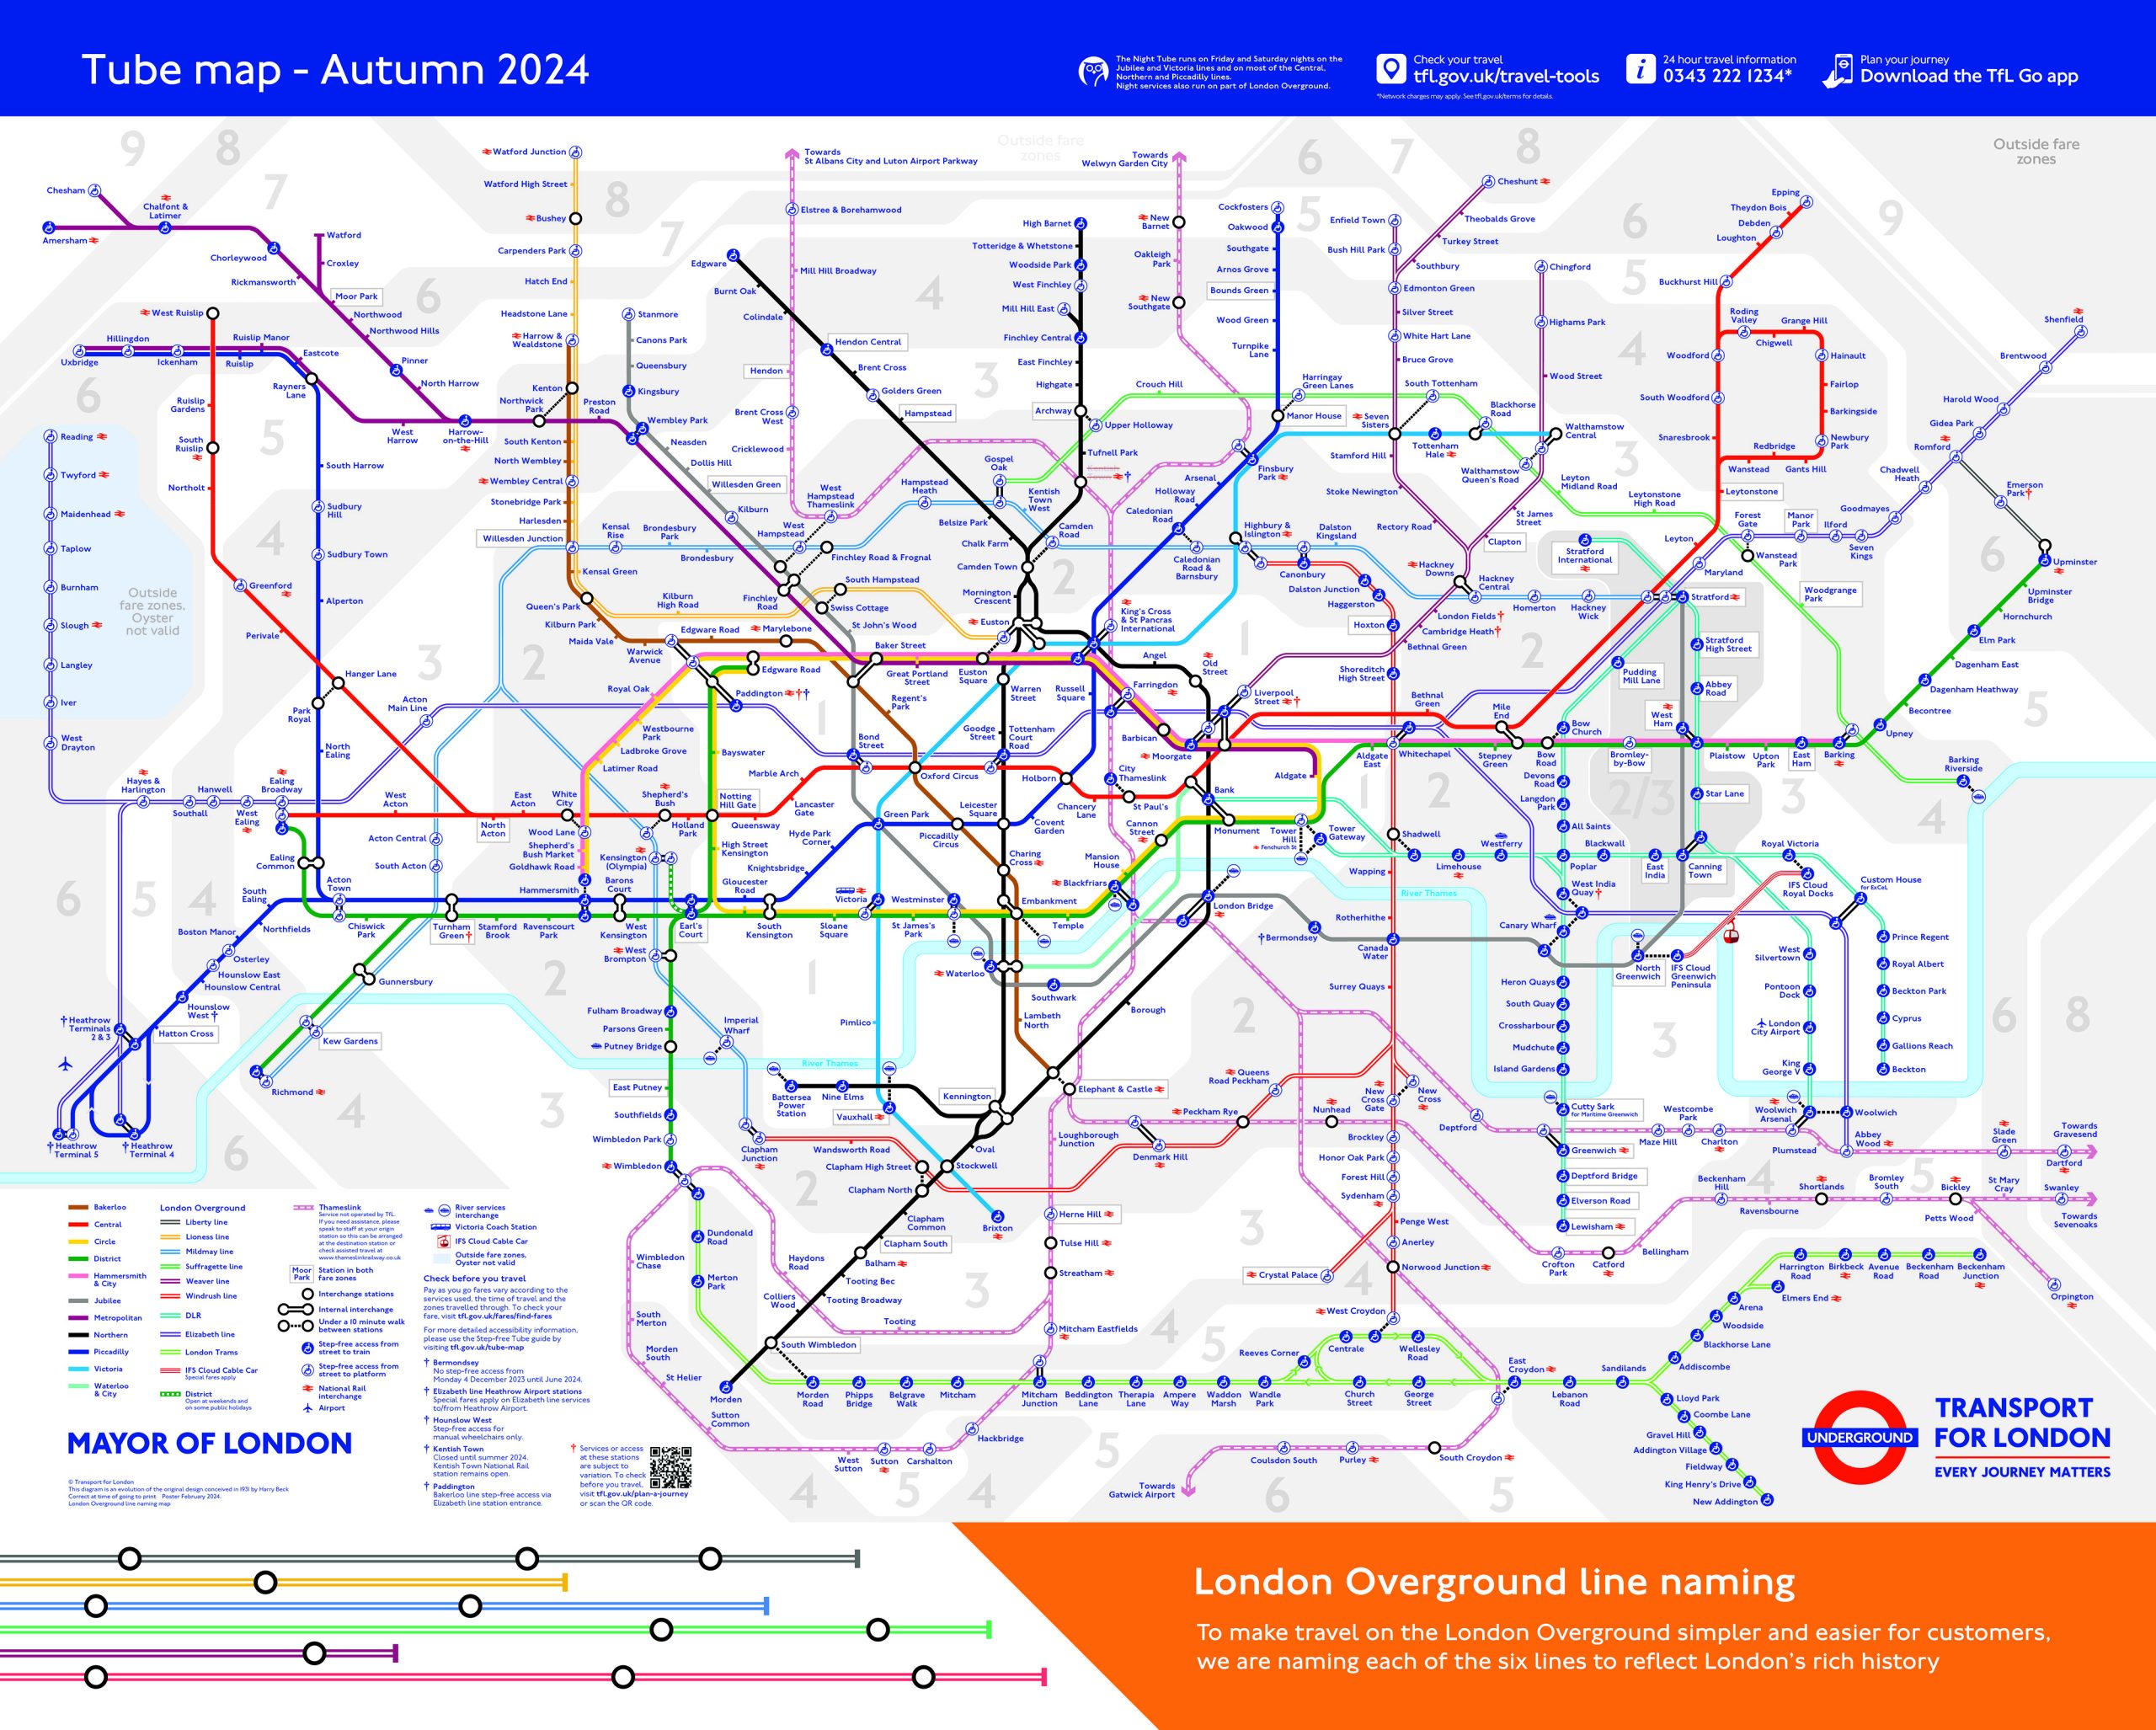 Transport for London updated Tube map